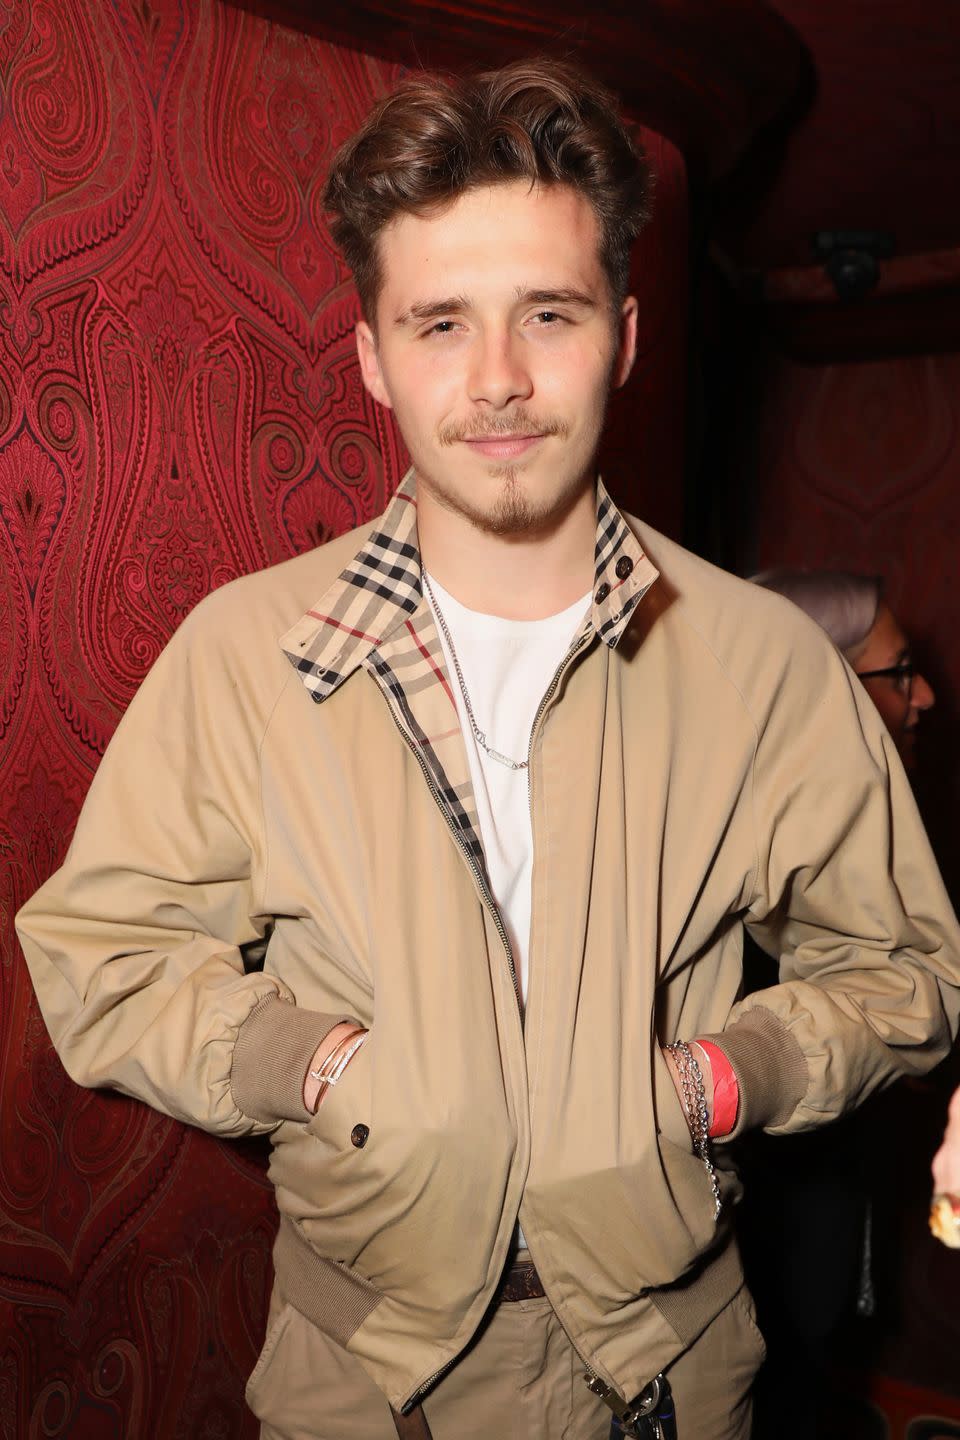 <p>We all know that trends come back in style, but seeing Brooklyn Beckham rock this '90s nostalgia look makes us feel extremely old. That aside, the model is killing his ode to the heartthrob haircut. </p>